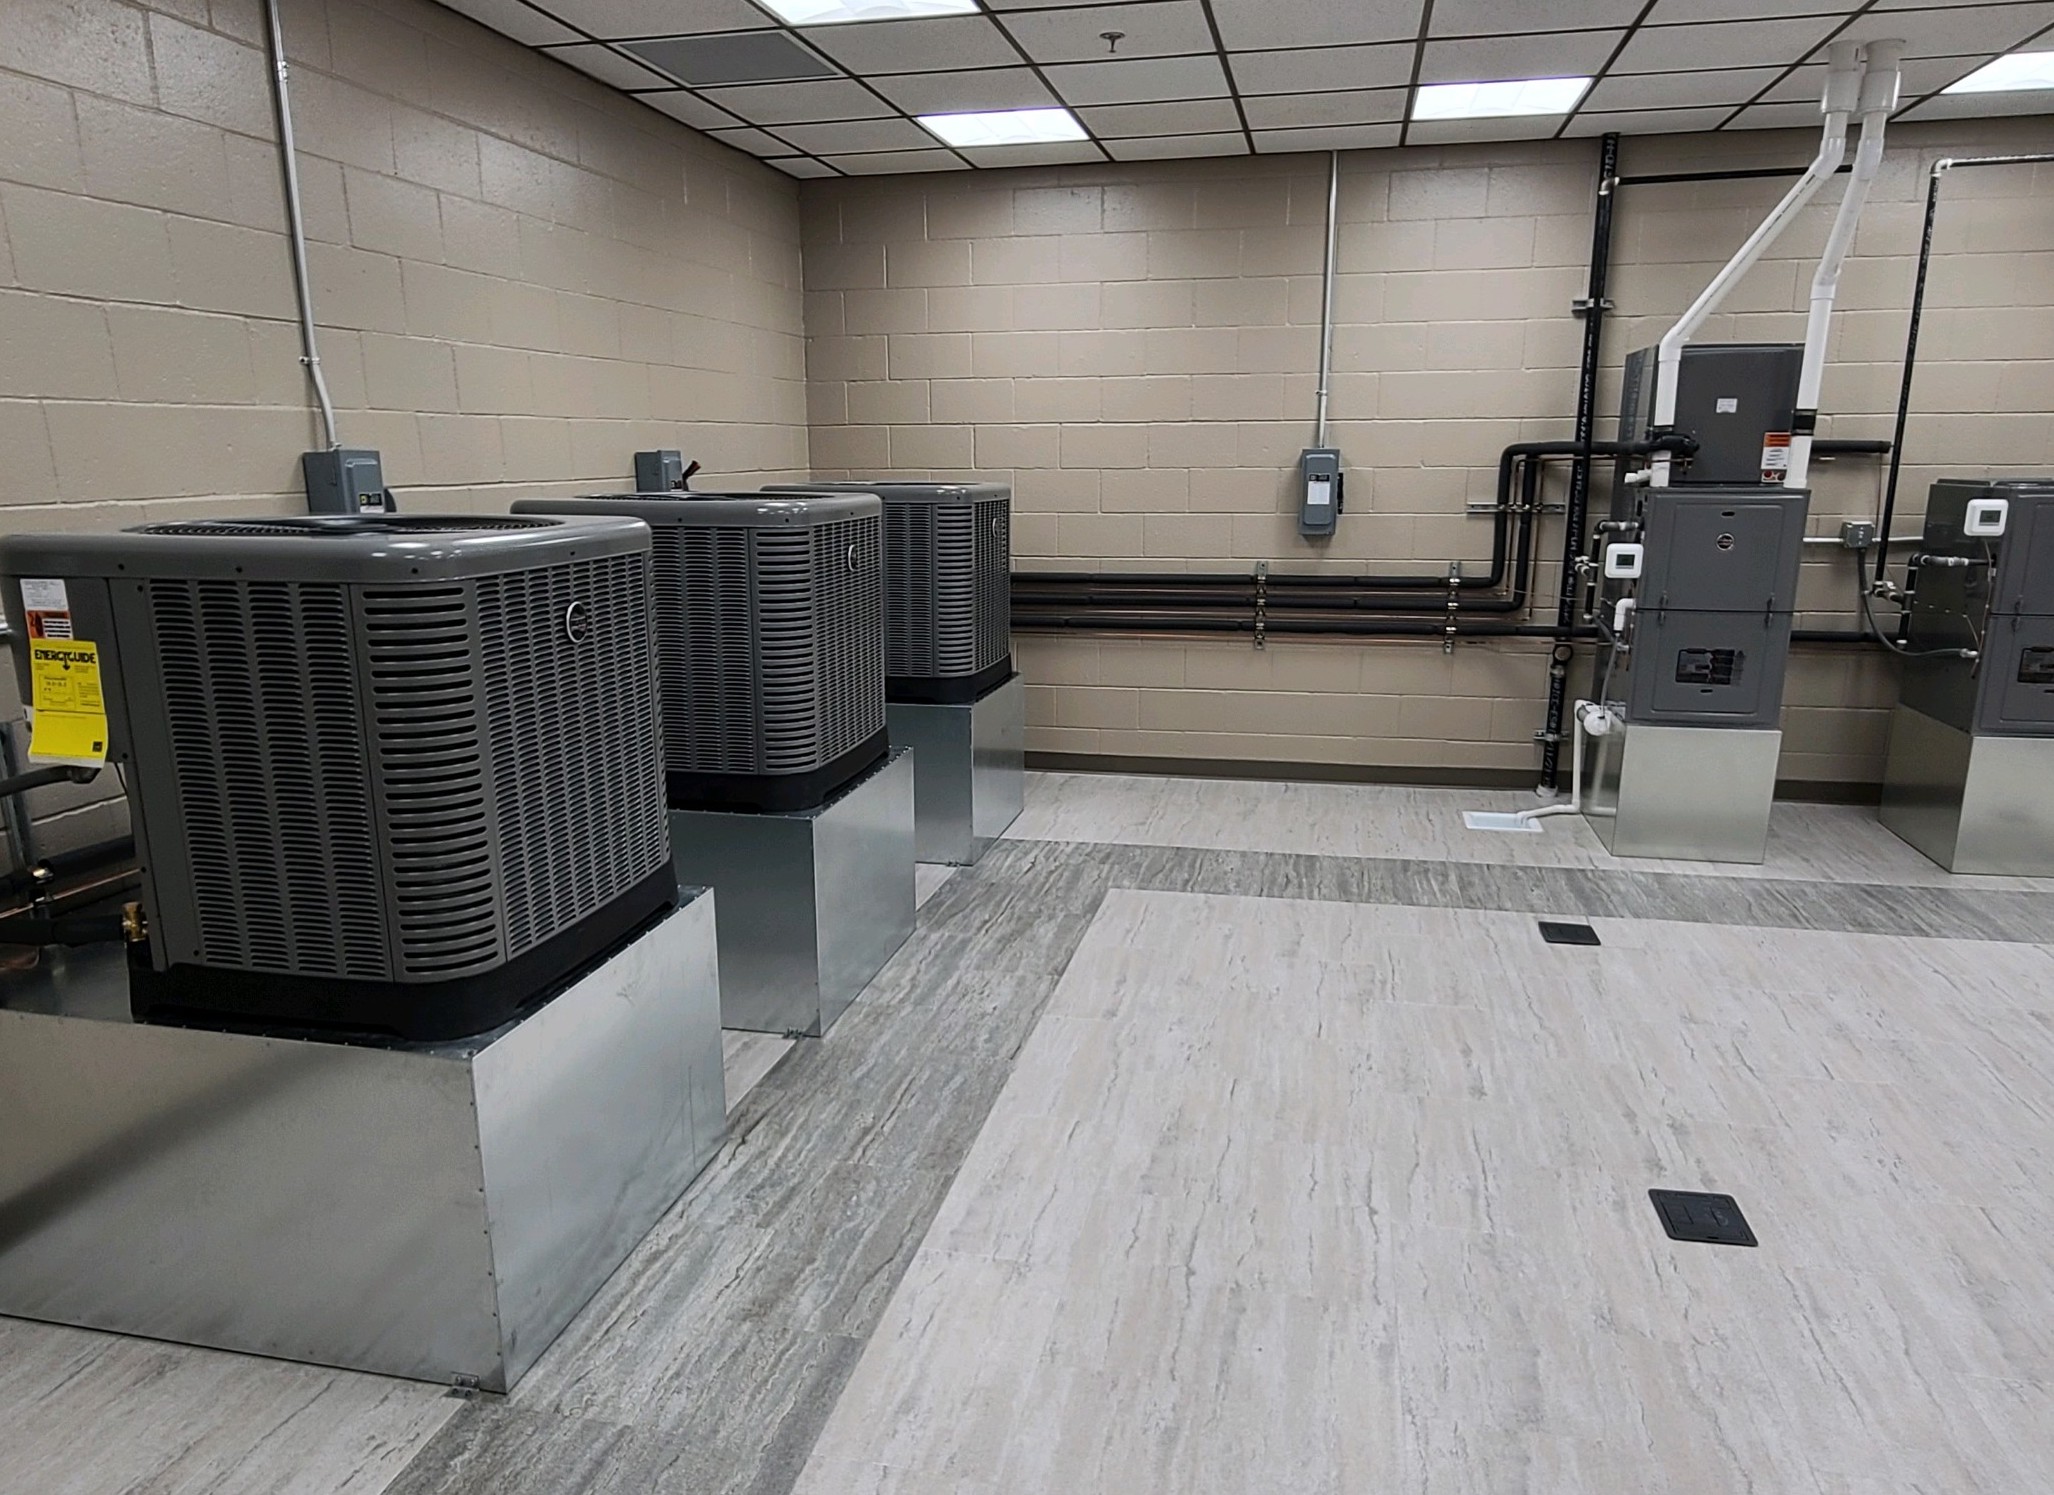 WNC News and Notes: HVAC, biology labs enhance learning experiences, job opportunities for students